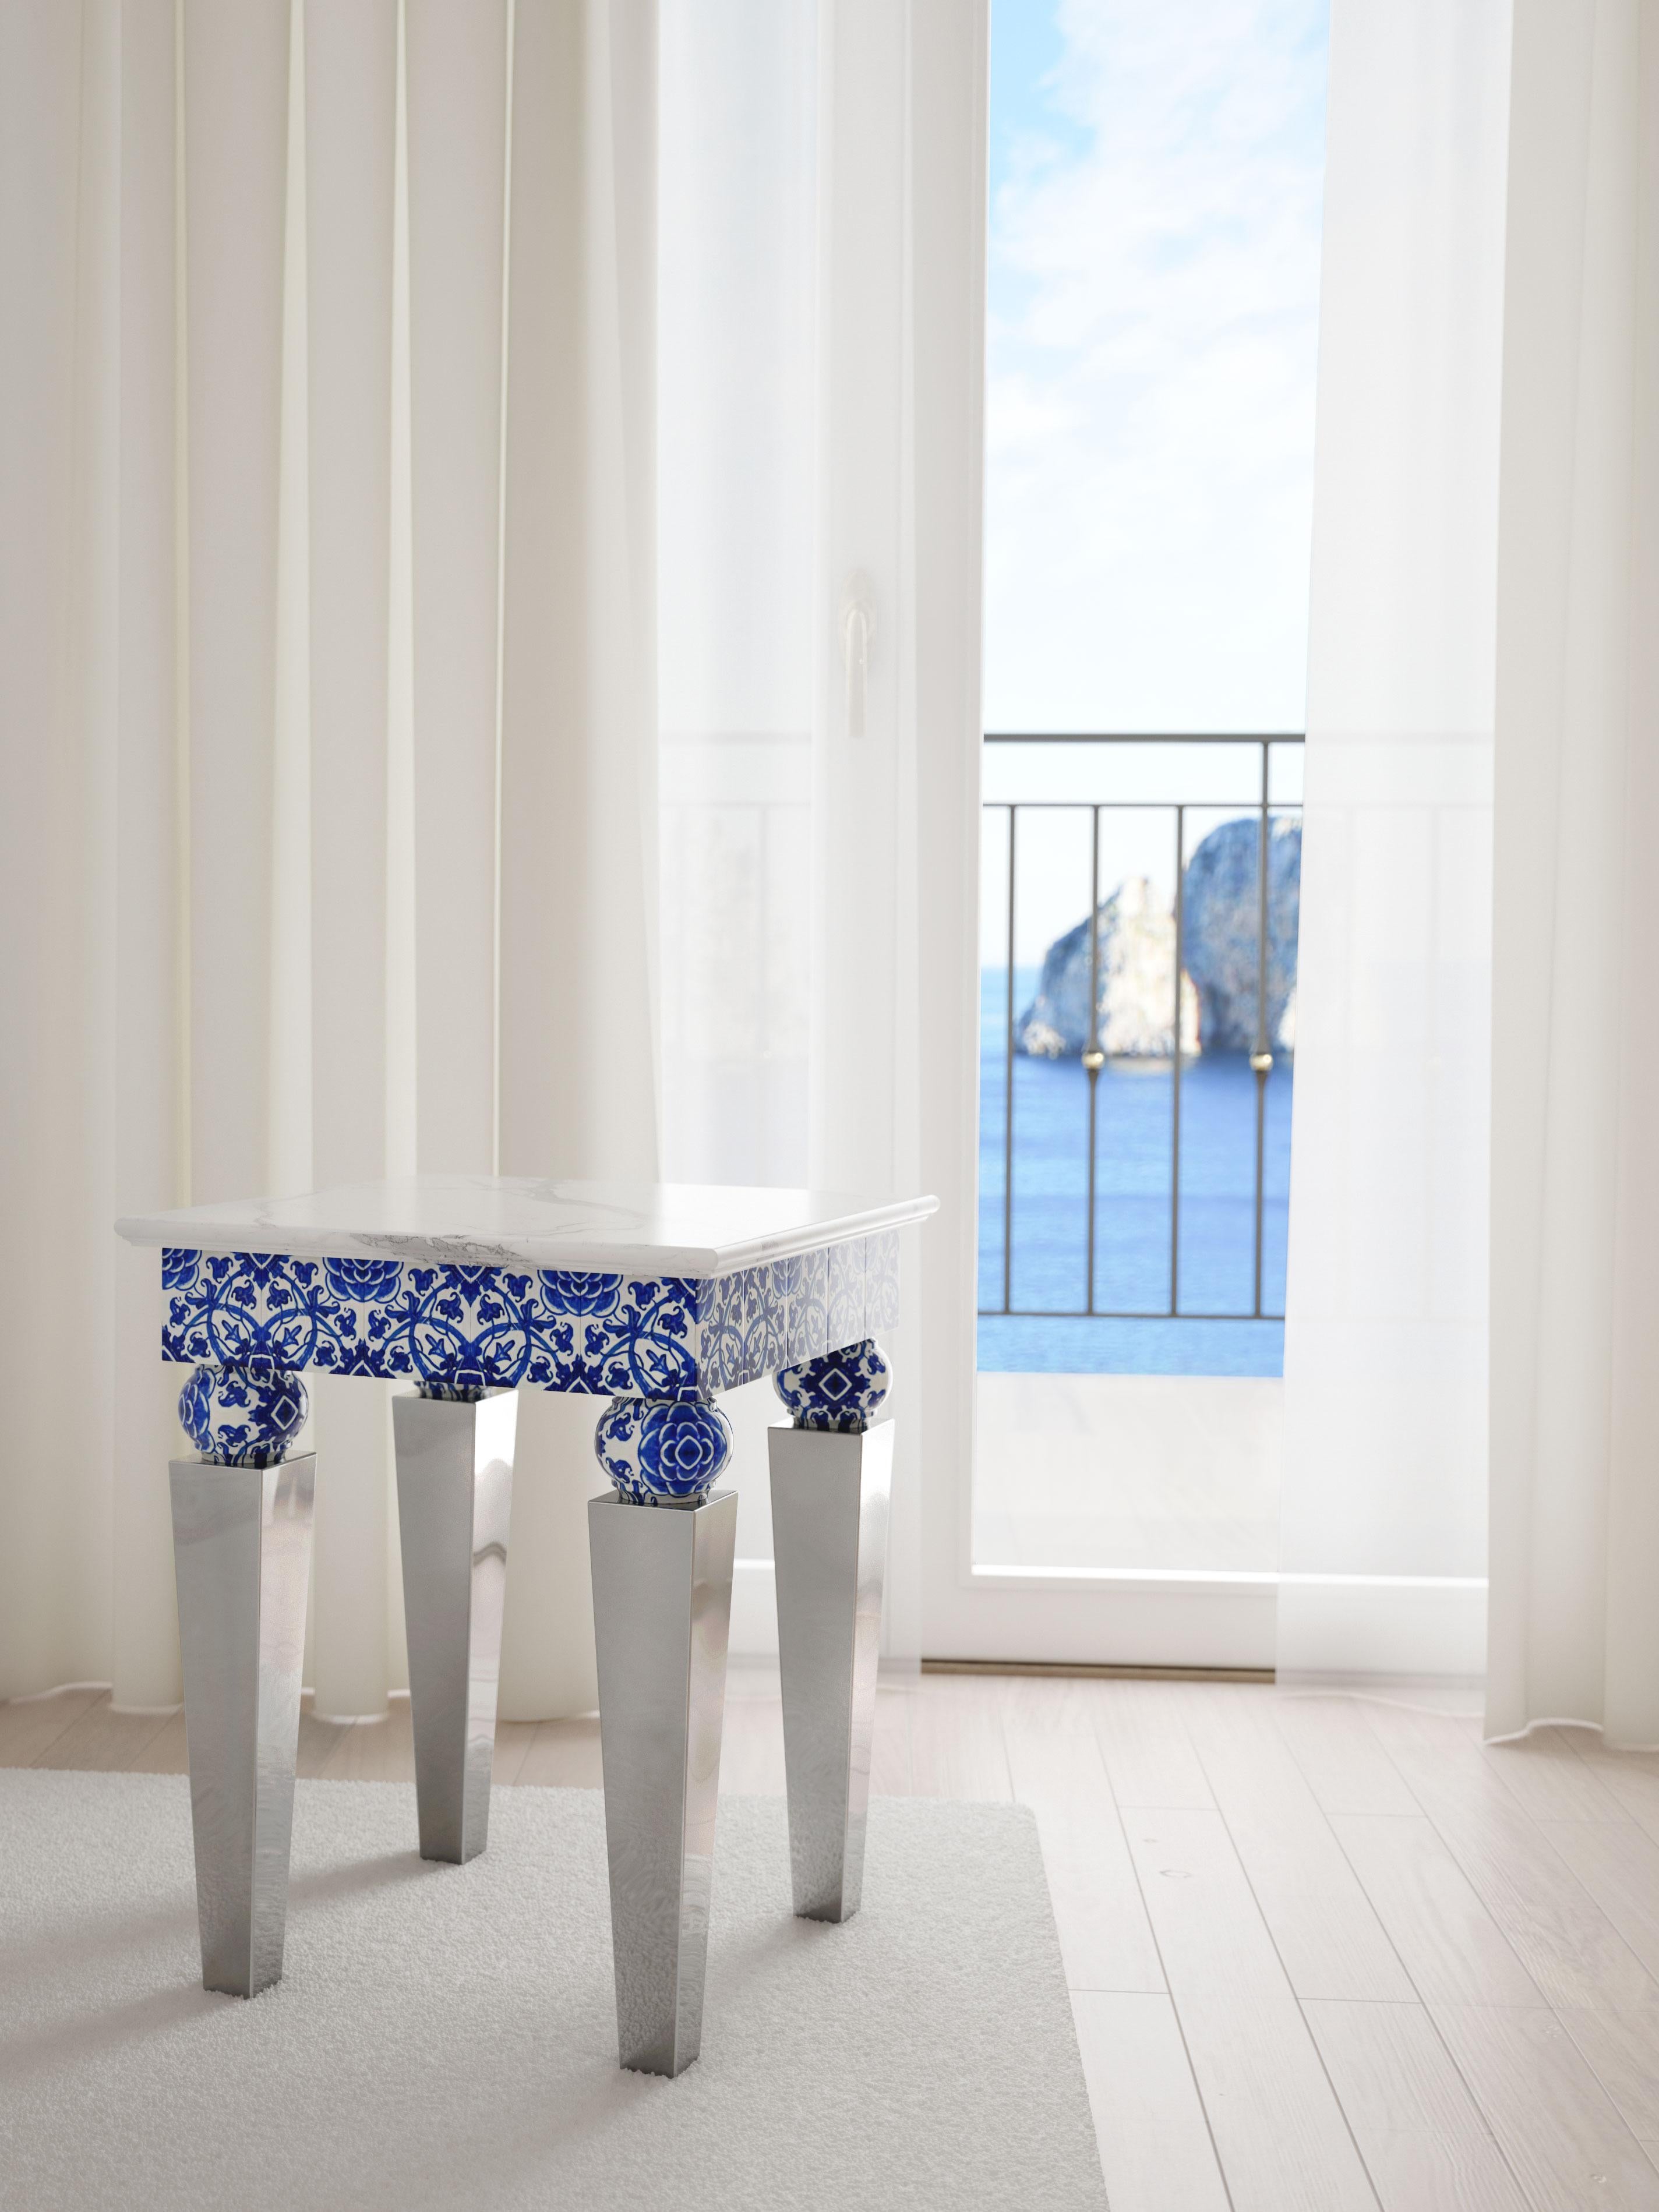 Exclusive pair of side tables with white Statuary marble top, mirror finish steel legs and embellished with 20 blue and white glazed ceramic tiles. The majolica elements are hand crafted and hand painted in Italy.
This tables called 